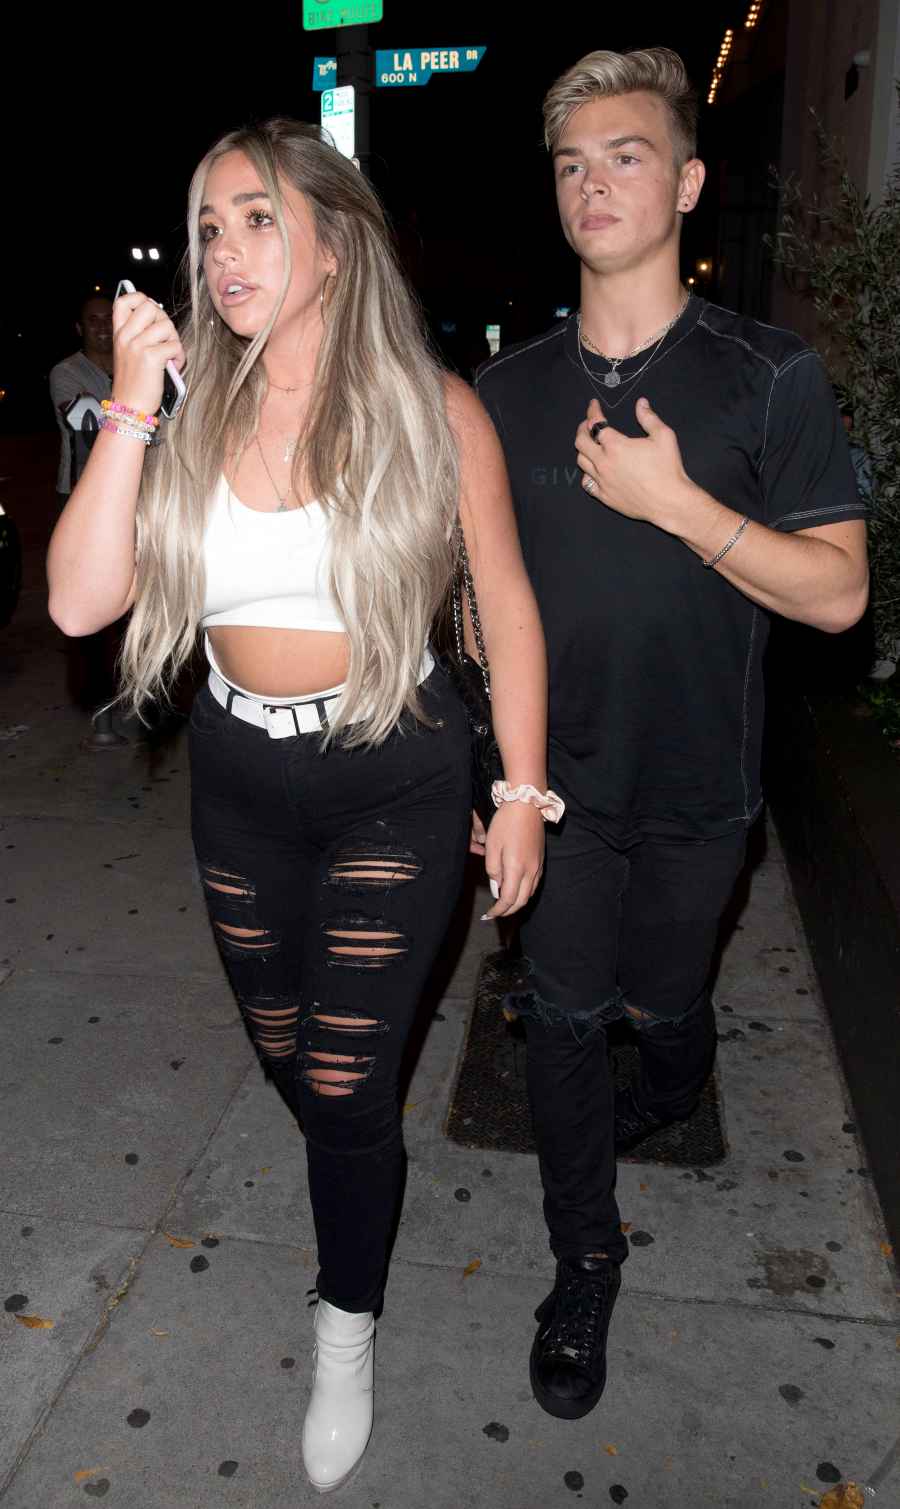 Brielle Biermann Ariana Biermann Look Like Twins While Out With Stallone Sisters